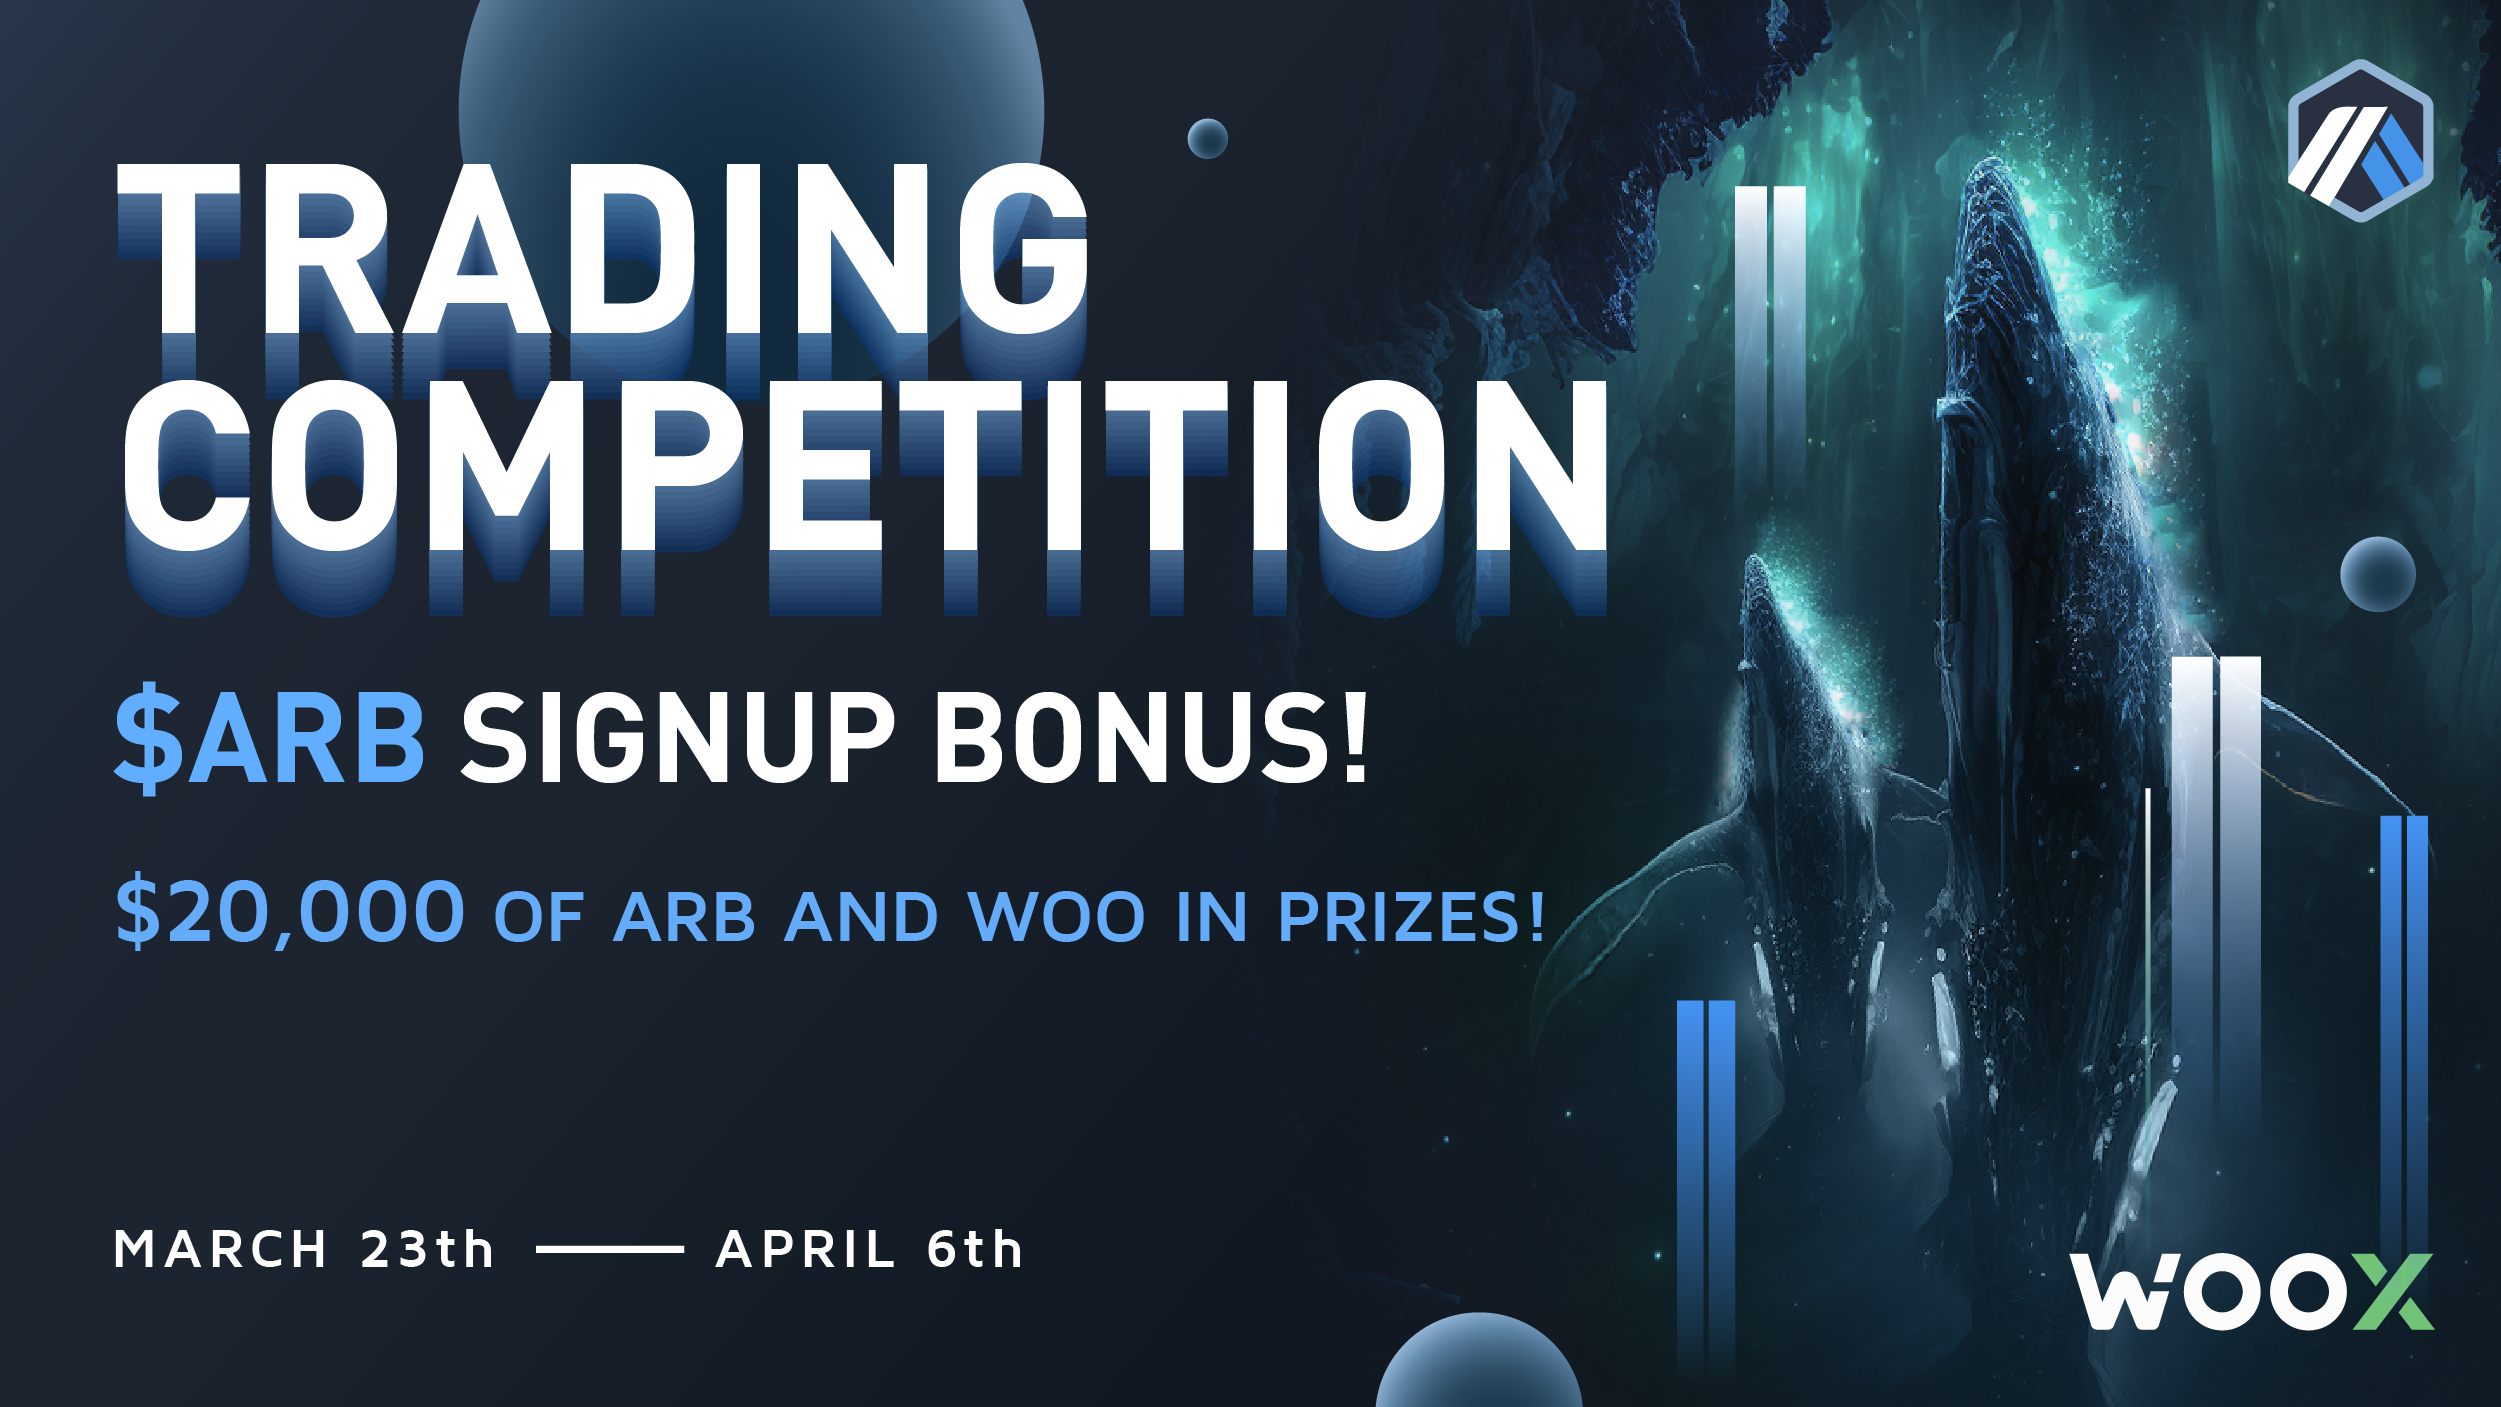 ARB Trading Competition and signup bonus Sign up and trade on WOO X